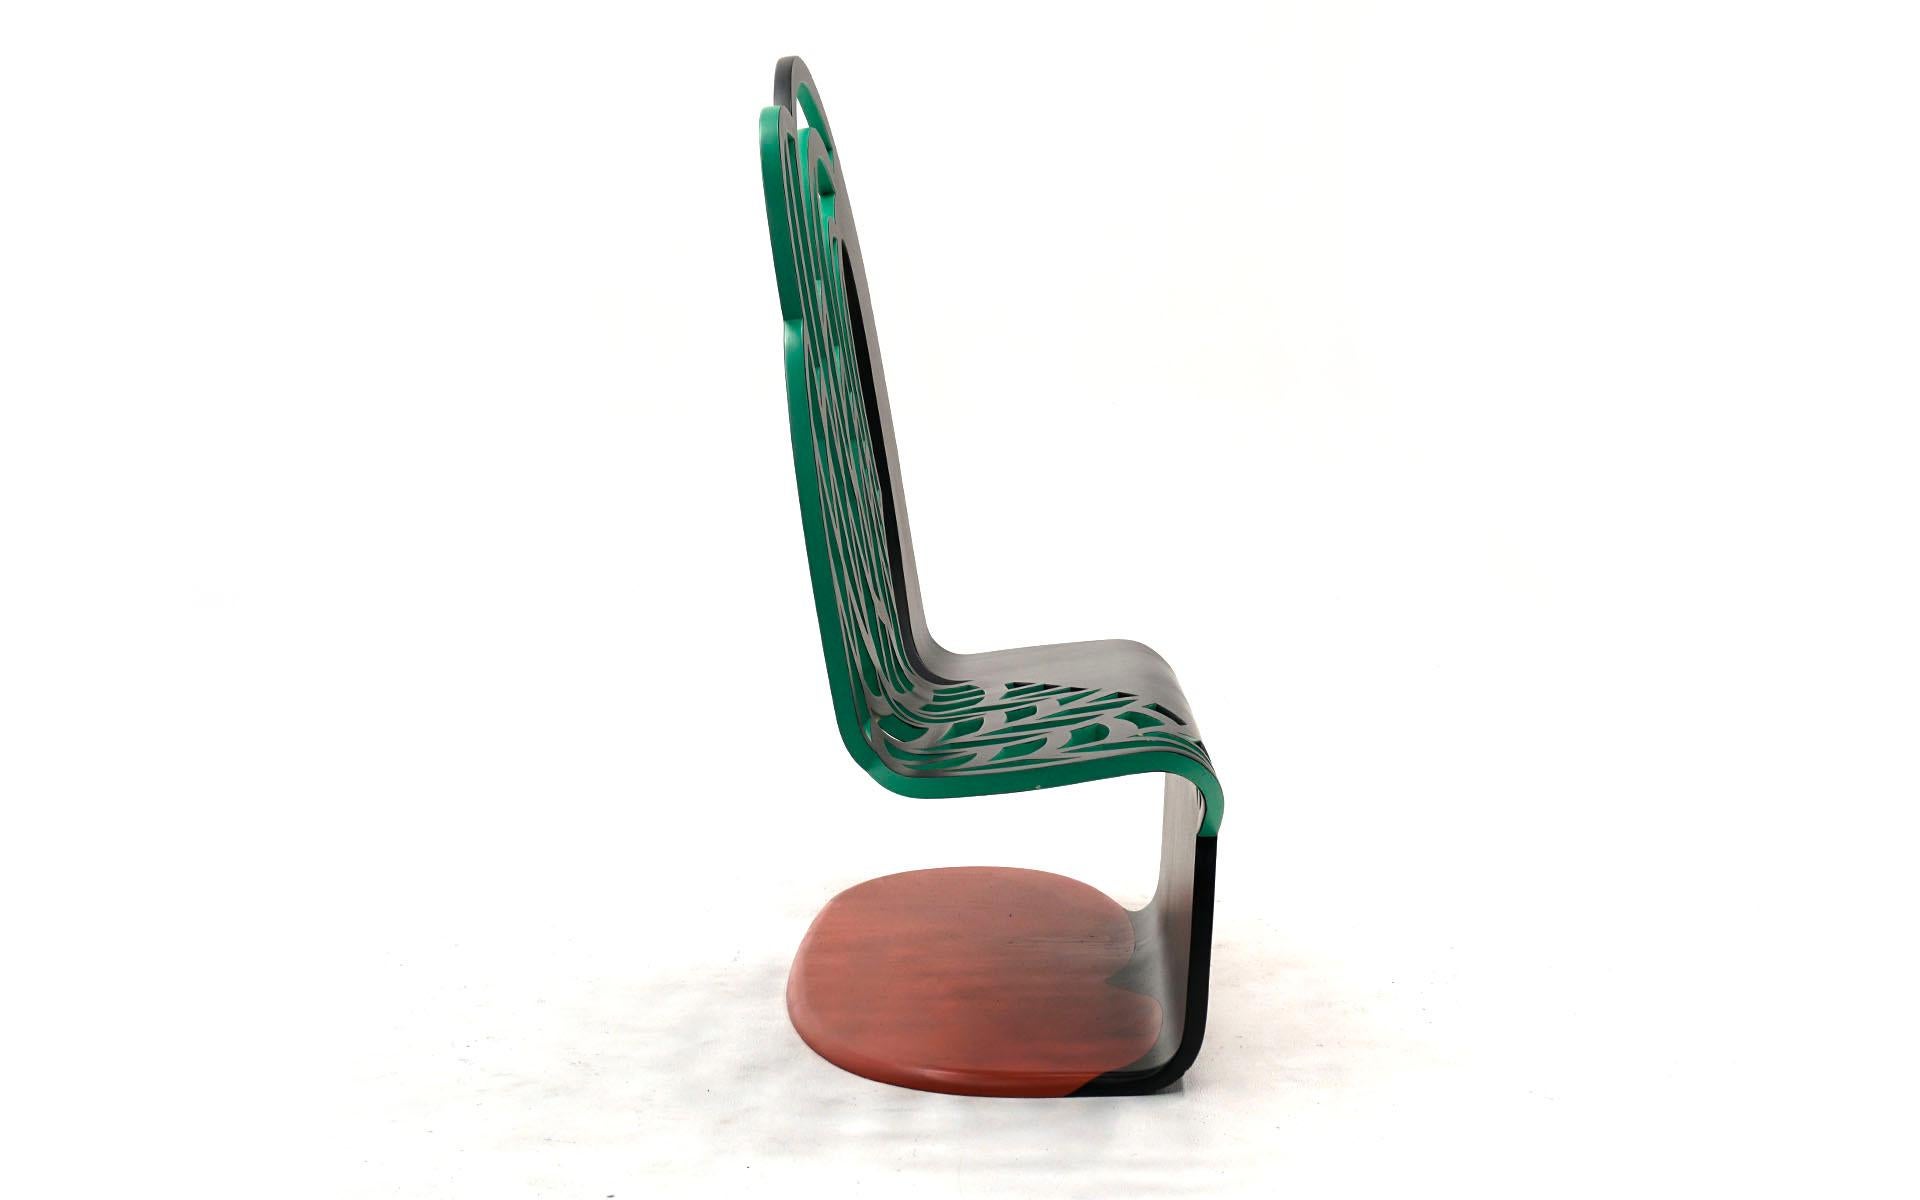 Lacquered Postmodern Bench with High Back by Alan Siegel, 1986. Signed. #2 in the Edition For Sale